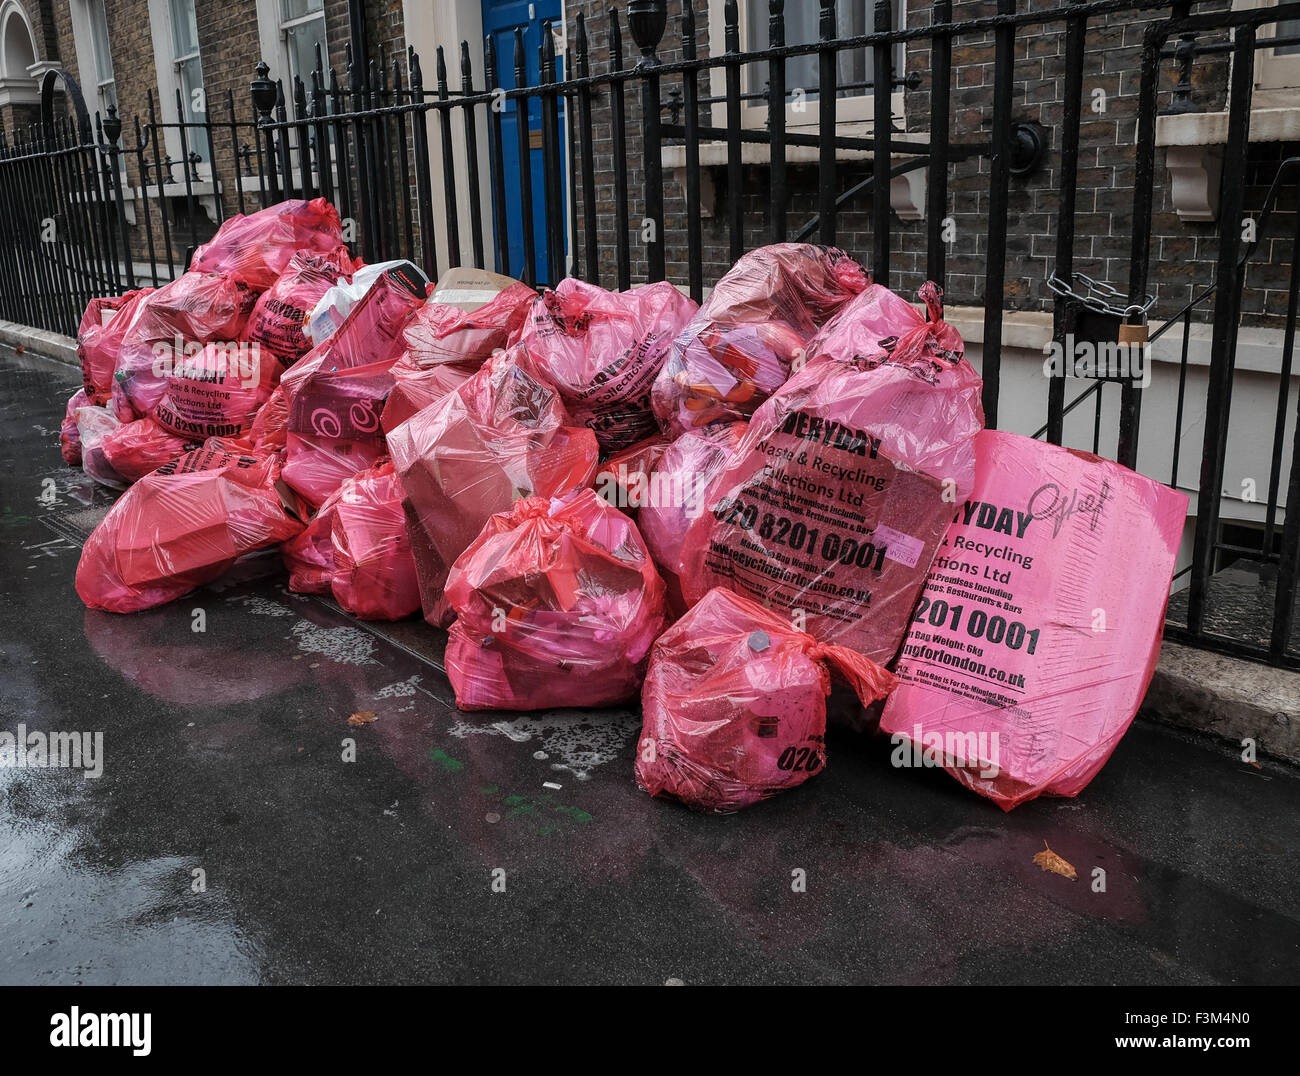 https://c8.alamy.com/comp/F3M4N0/recycle-rubbish-on-the-streets-of-london-in-pink-bags-F3M4N0.jpg